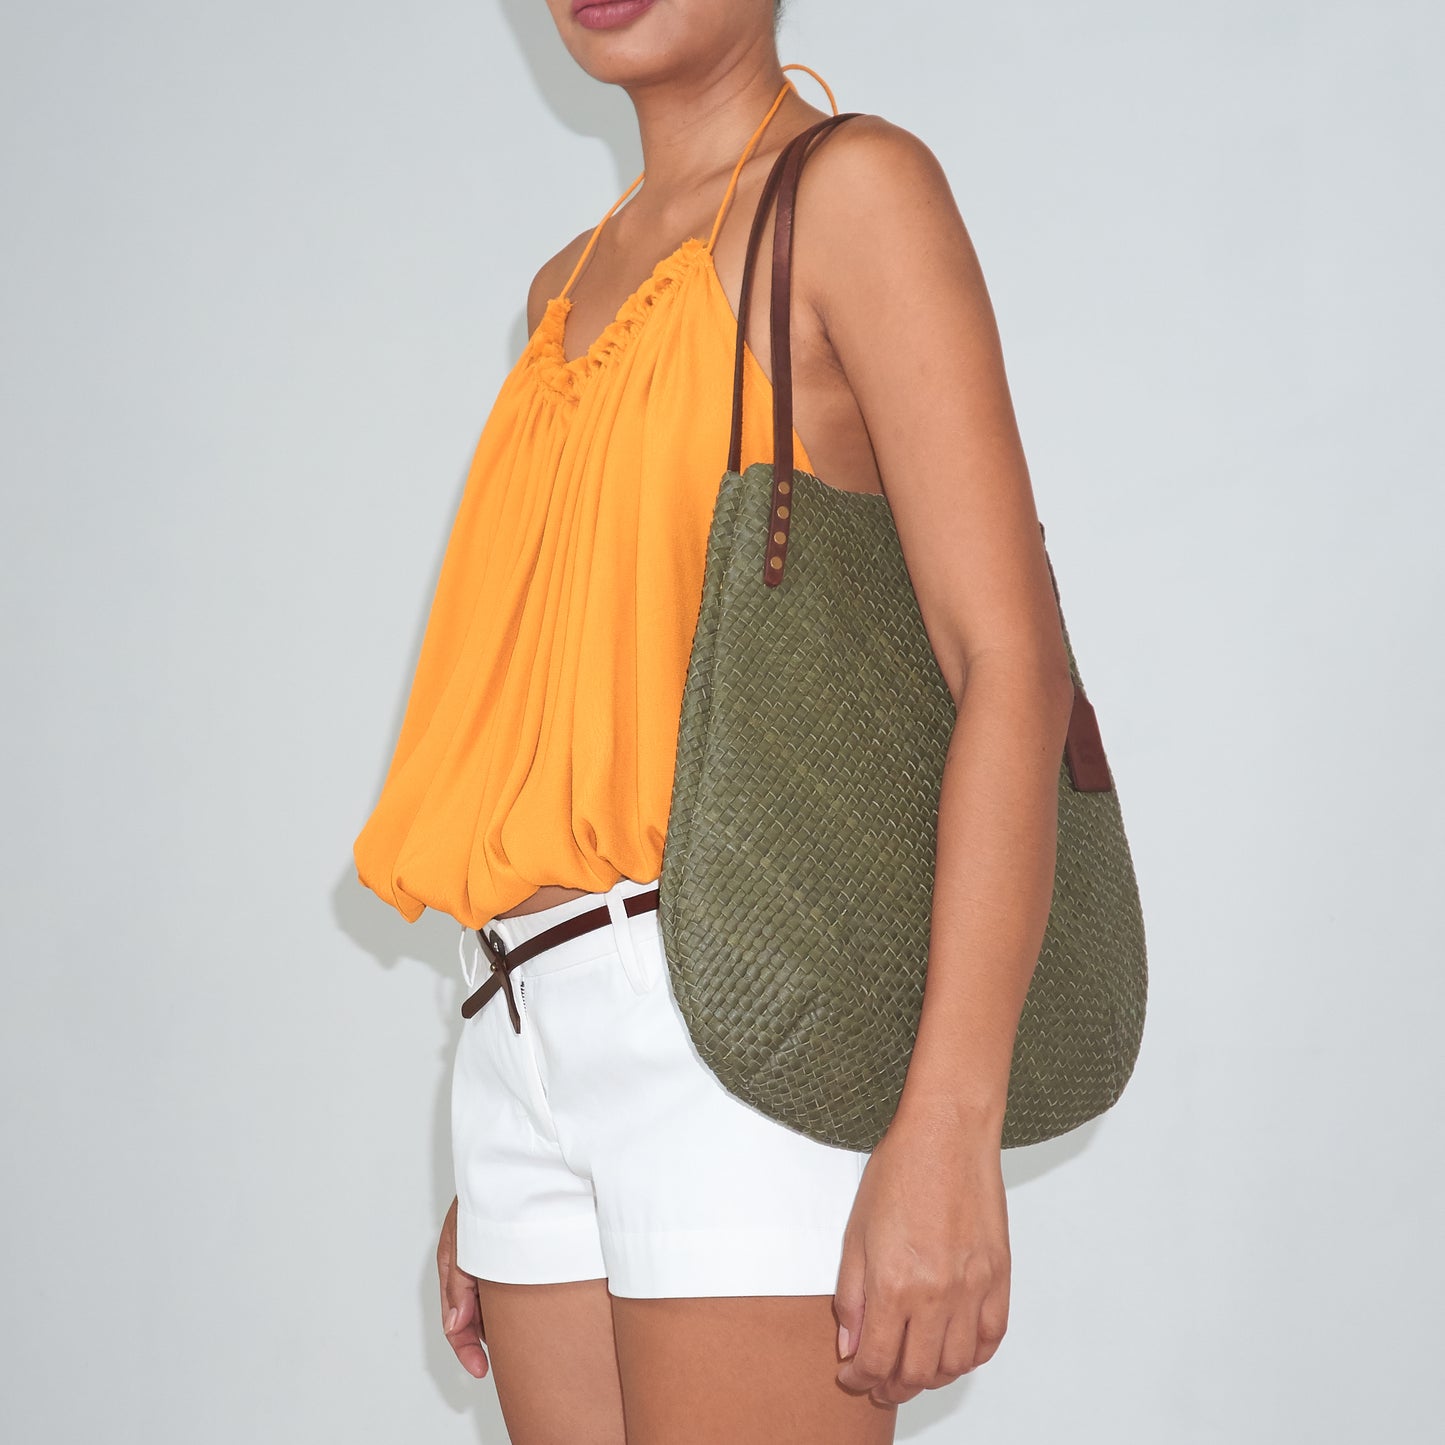 SIMPLY FIVE TOTE - Woven Leather | Light Olive Green & Rusty Brown